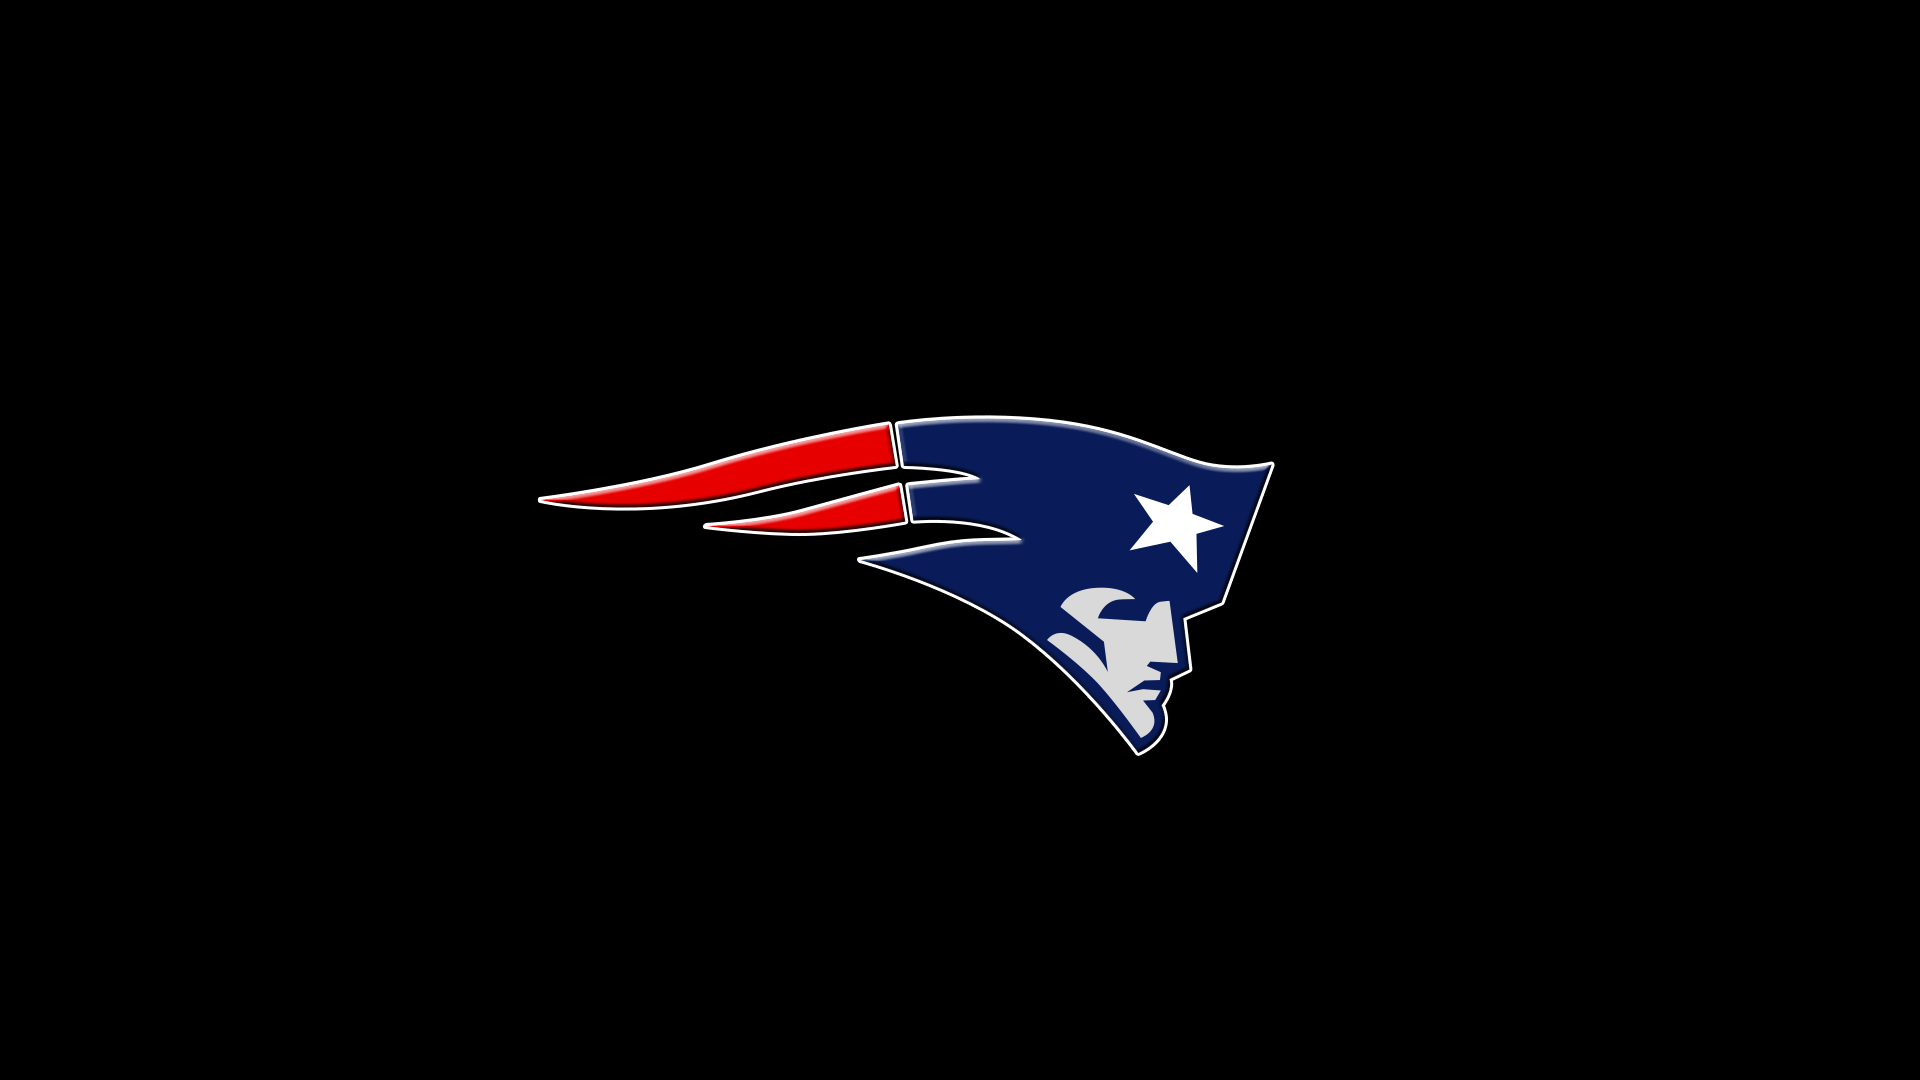 New England Patriots 2018 Wallpapers